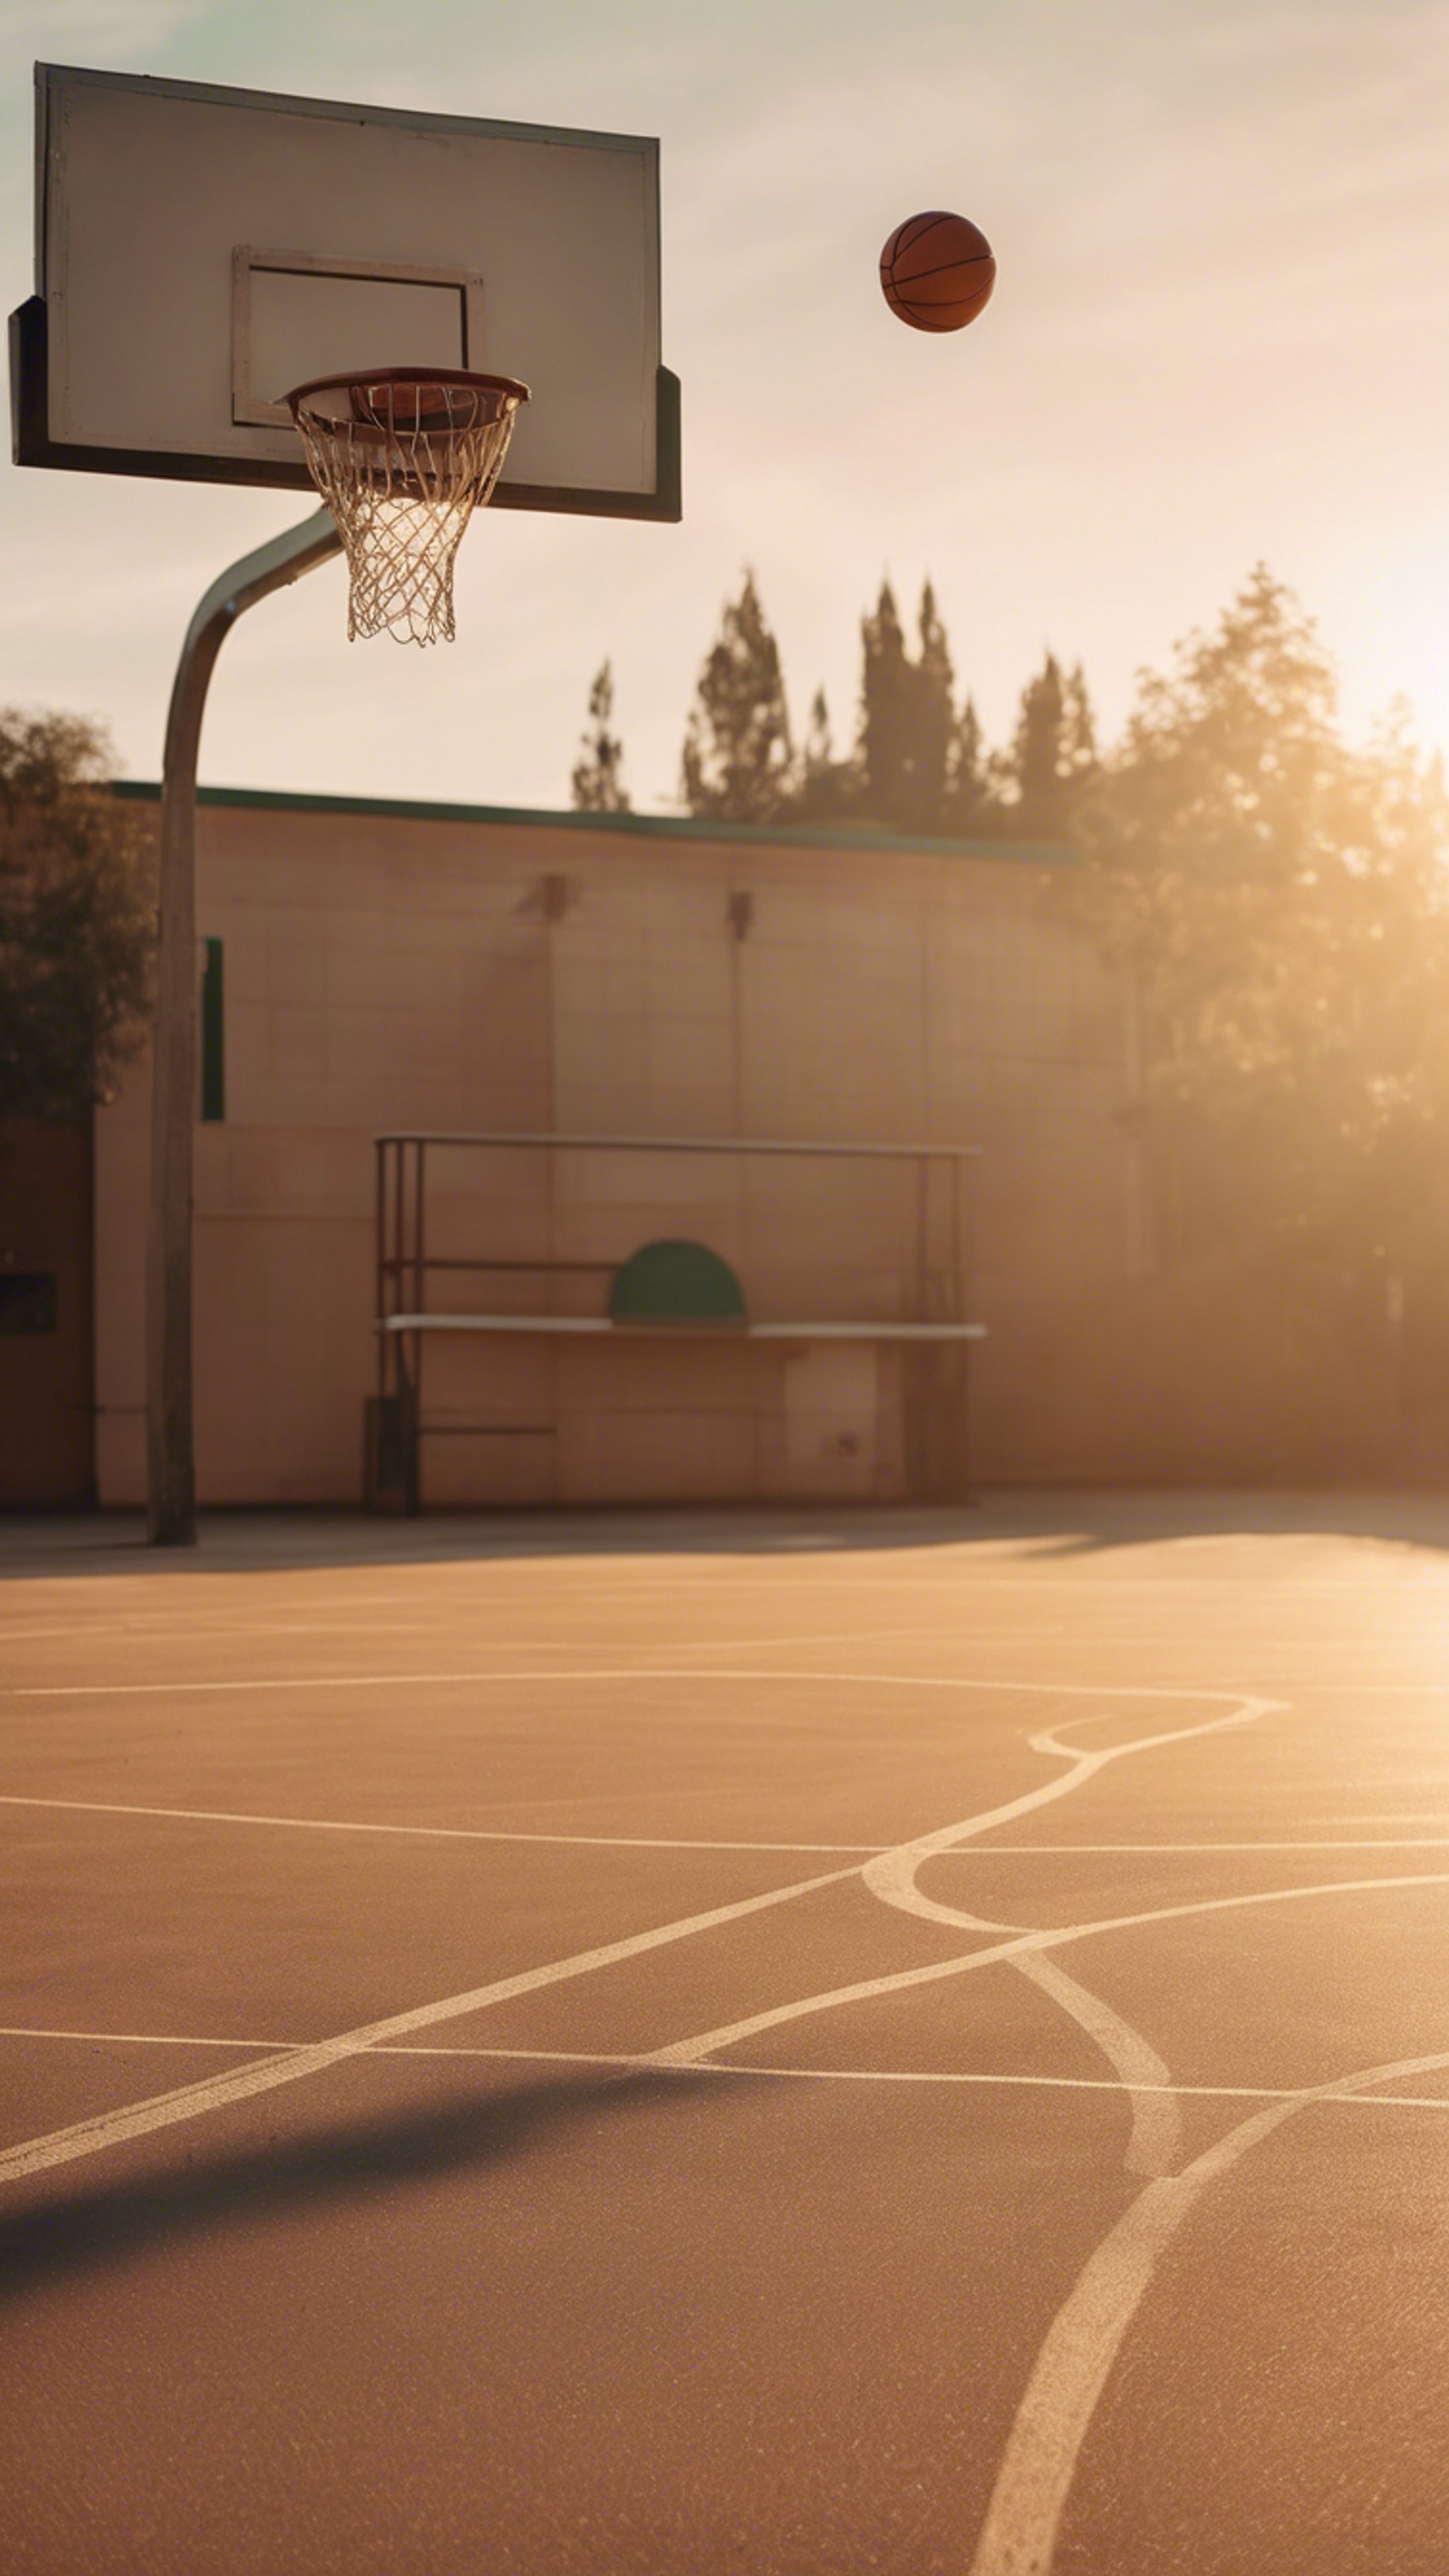 A deserted school’s basketball court in the pacific golden light of sunset. Sfondo[5d35315ab9de41dcbc38]